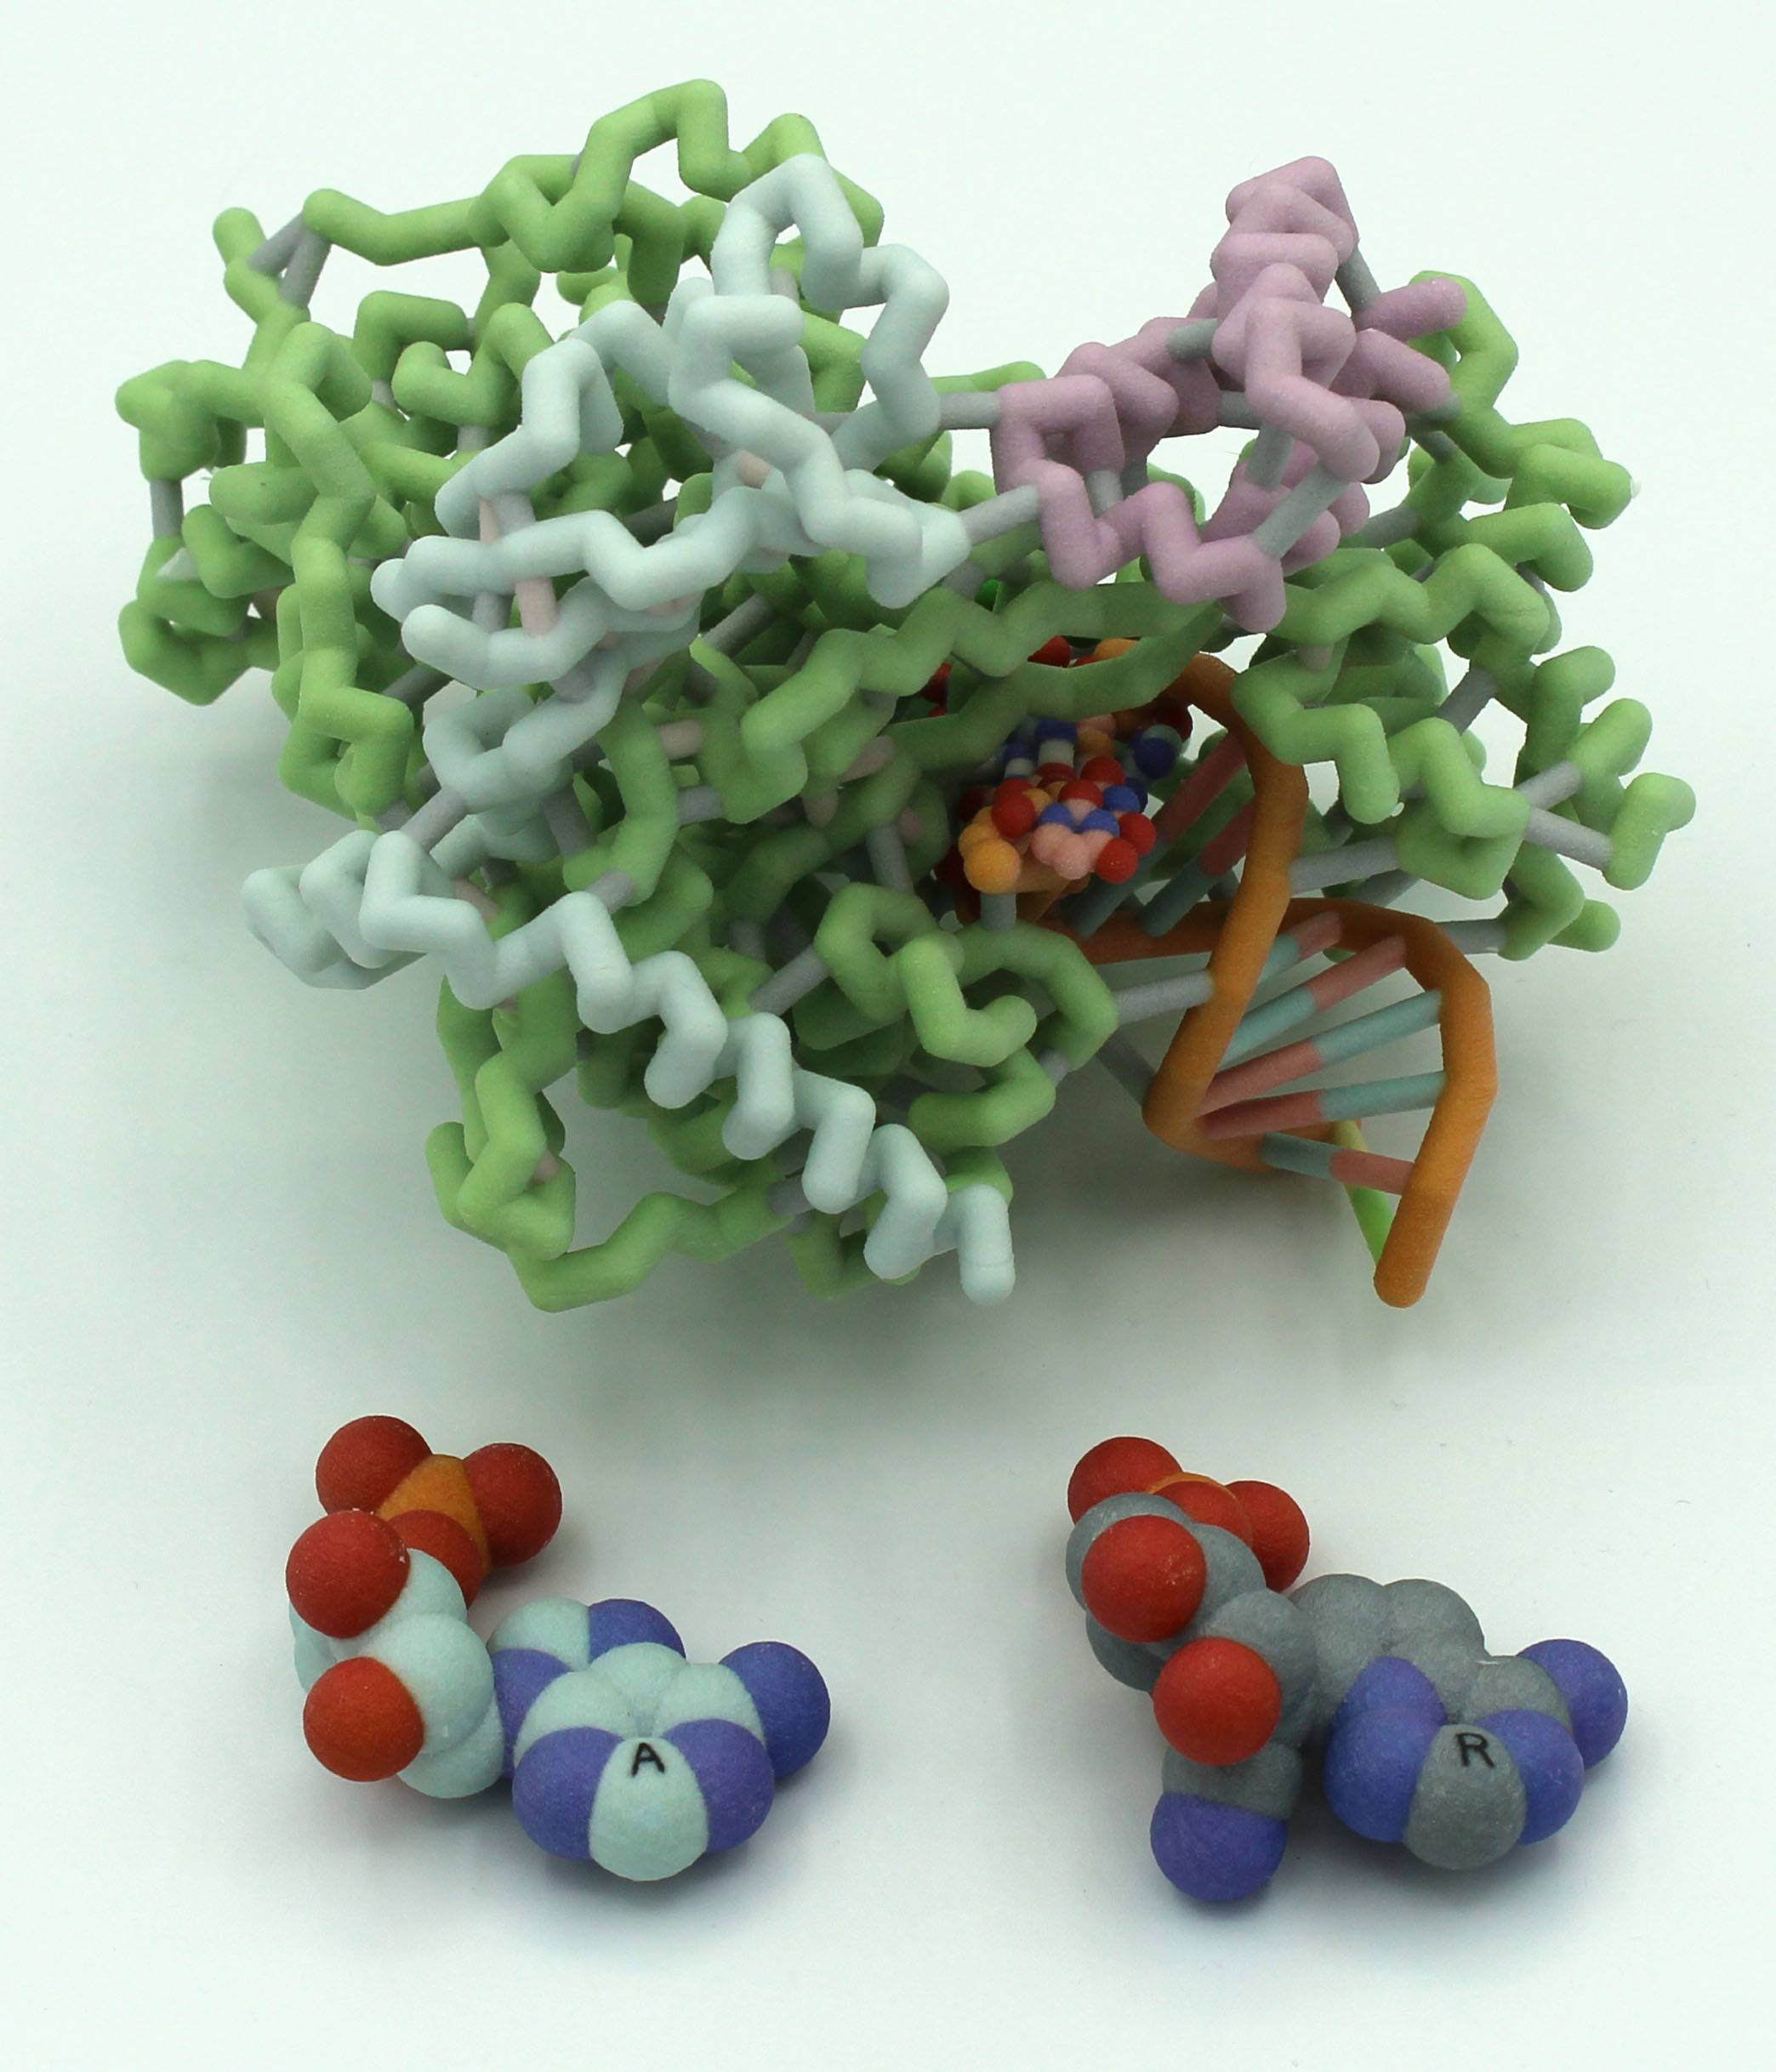 Physical models of (top) SARS-CoV-2 RNA-dependent RNA polymerase (RdRp) and (bottom, left to right) adenine and Remdesiv